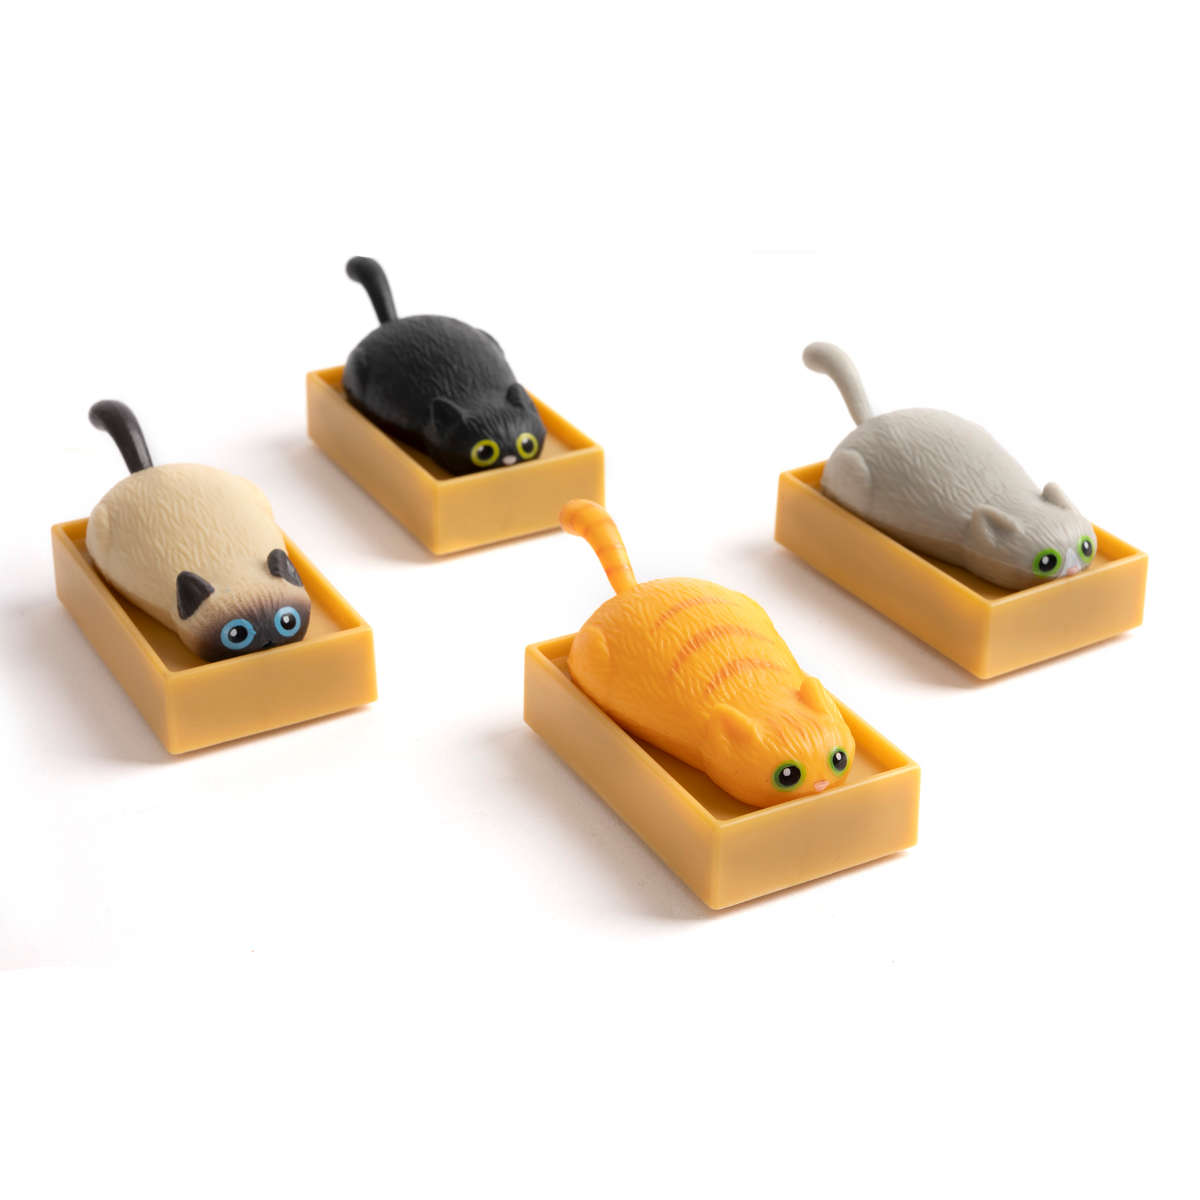 Archie McPhee Racing Cats in Boxes